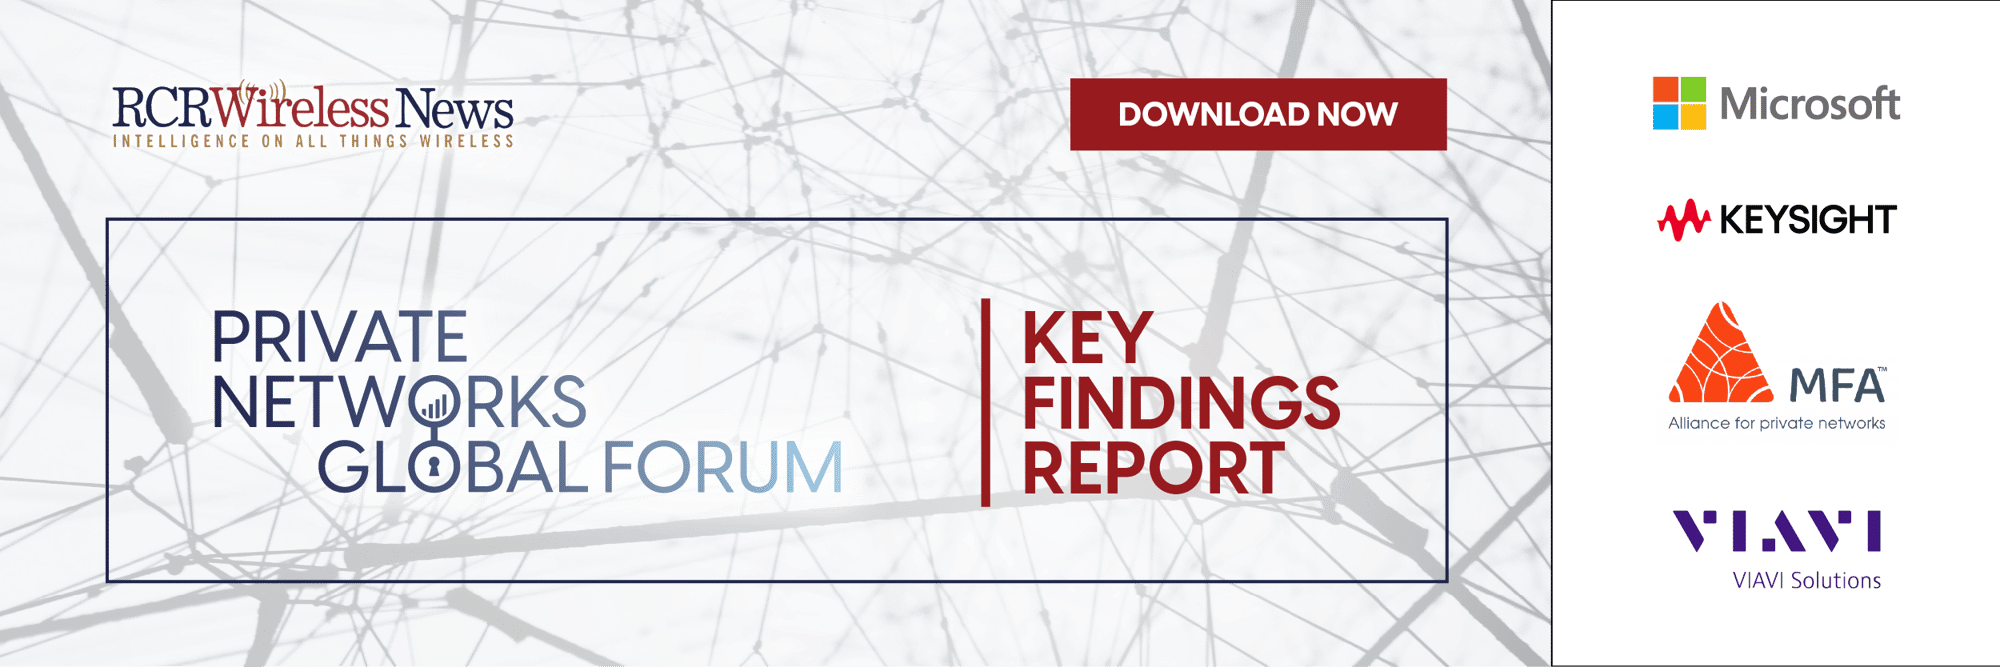 20230829 Private Networks Forum Key Findings Report 600x200